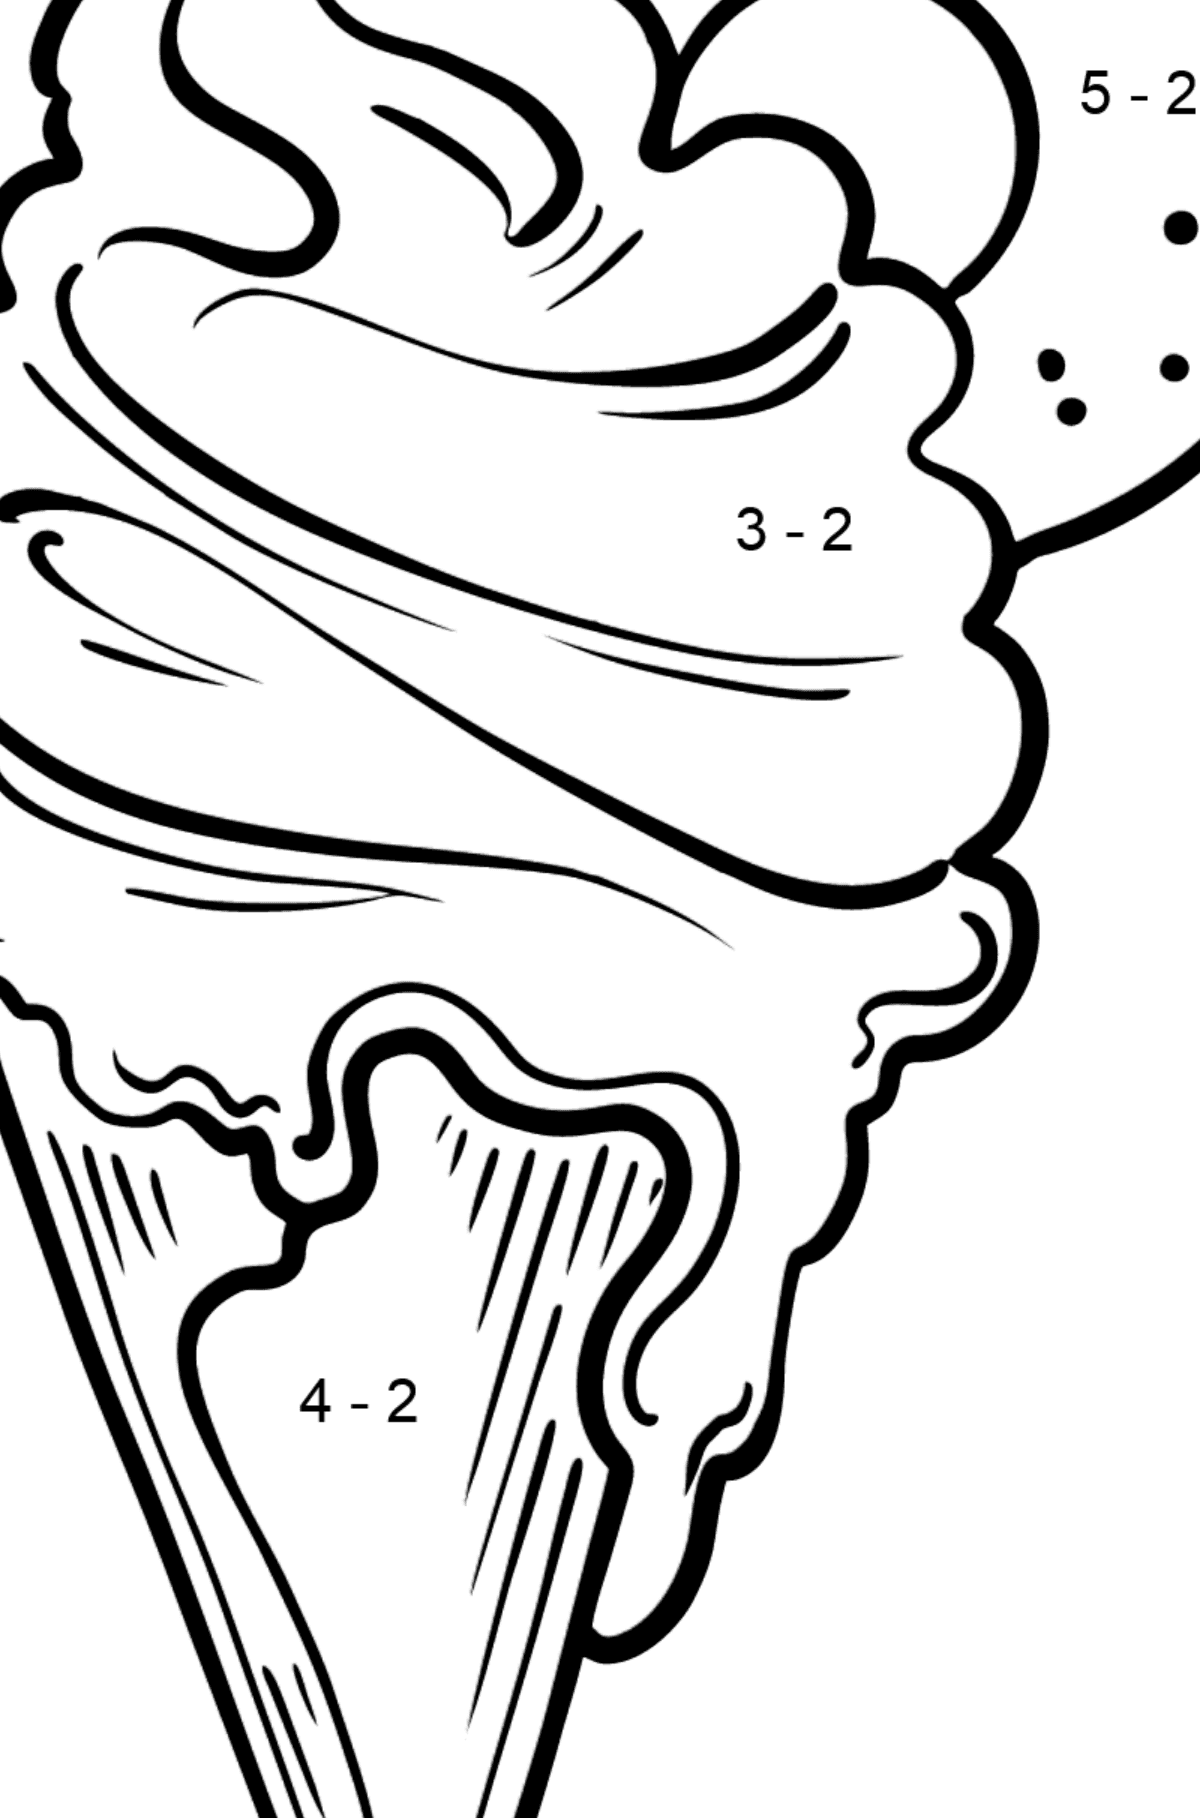 Ice Cream Cone and Pink Lollipop coloring page - Math Coloring - Subtraction for Kids